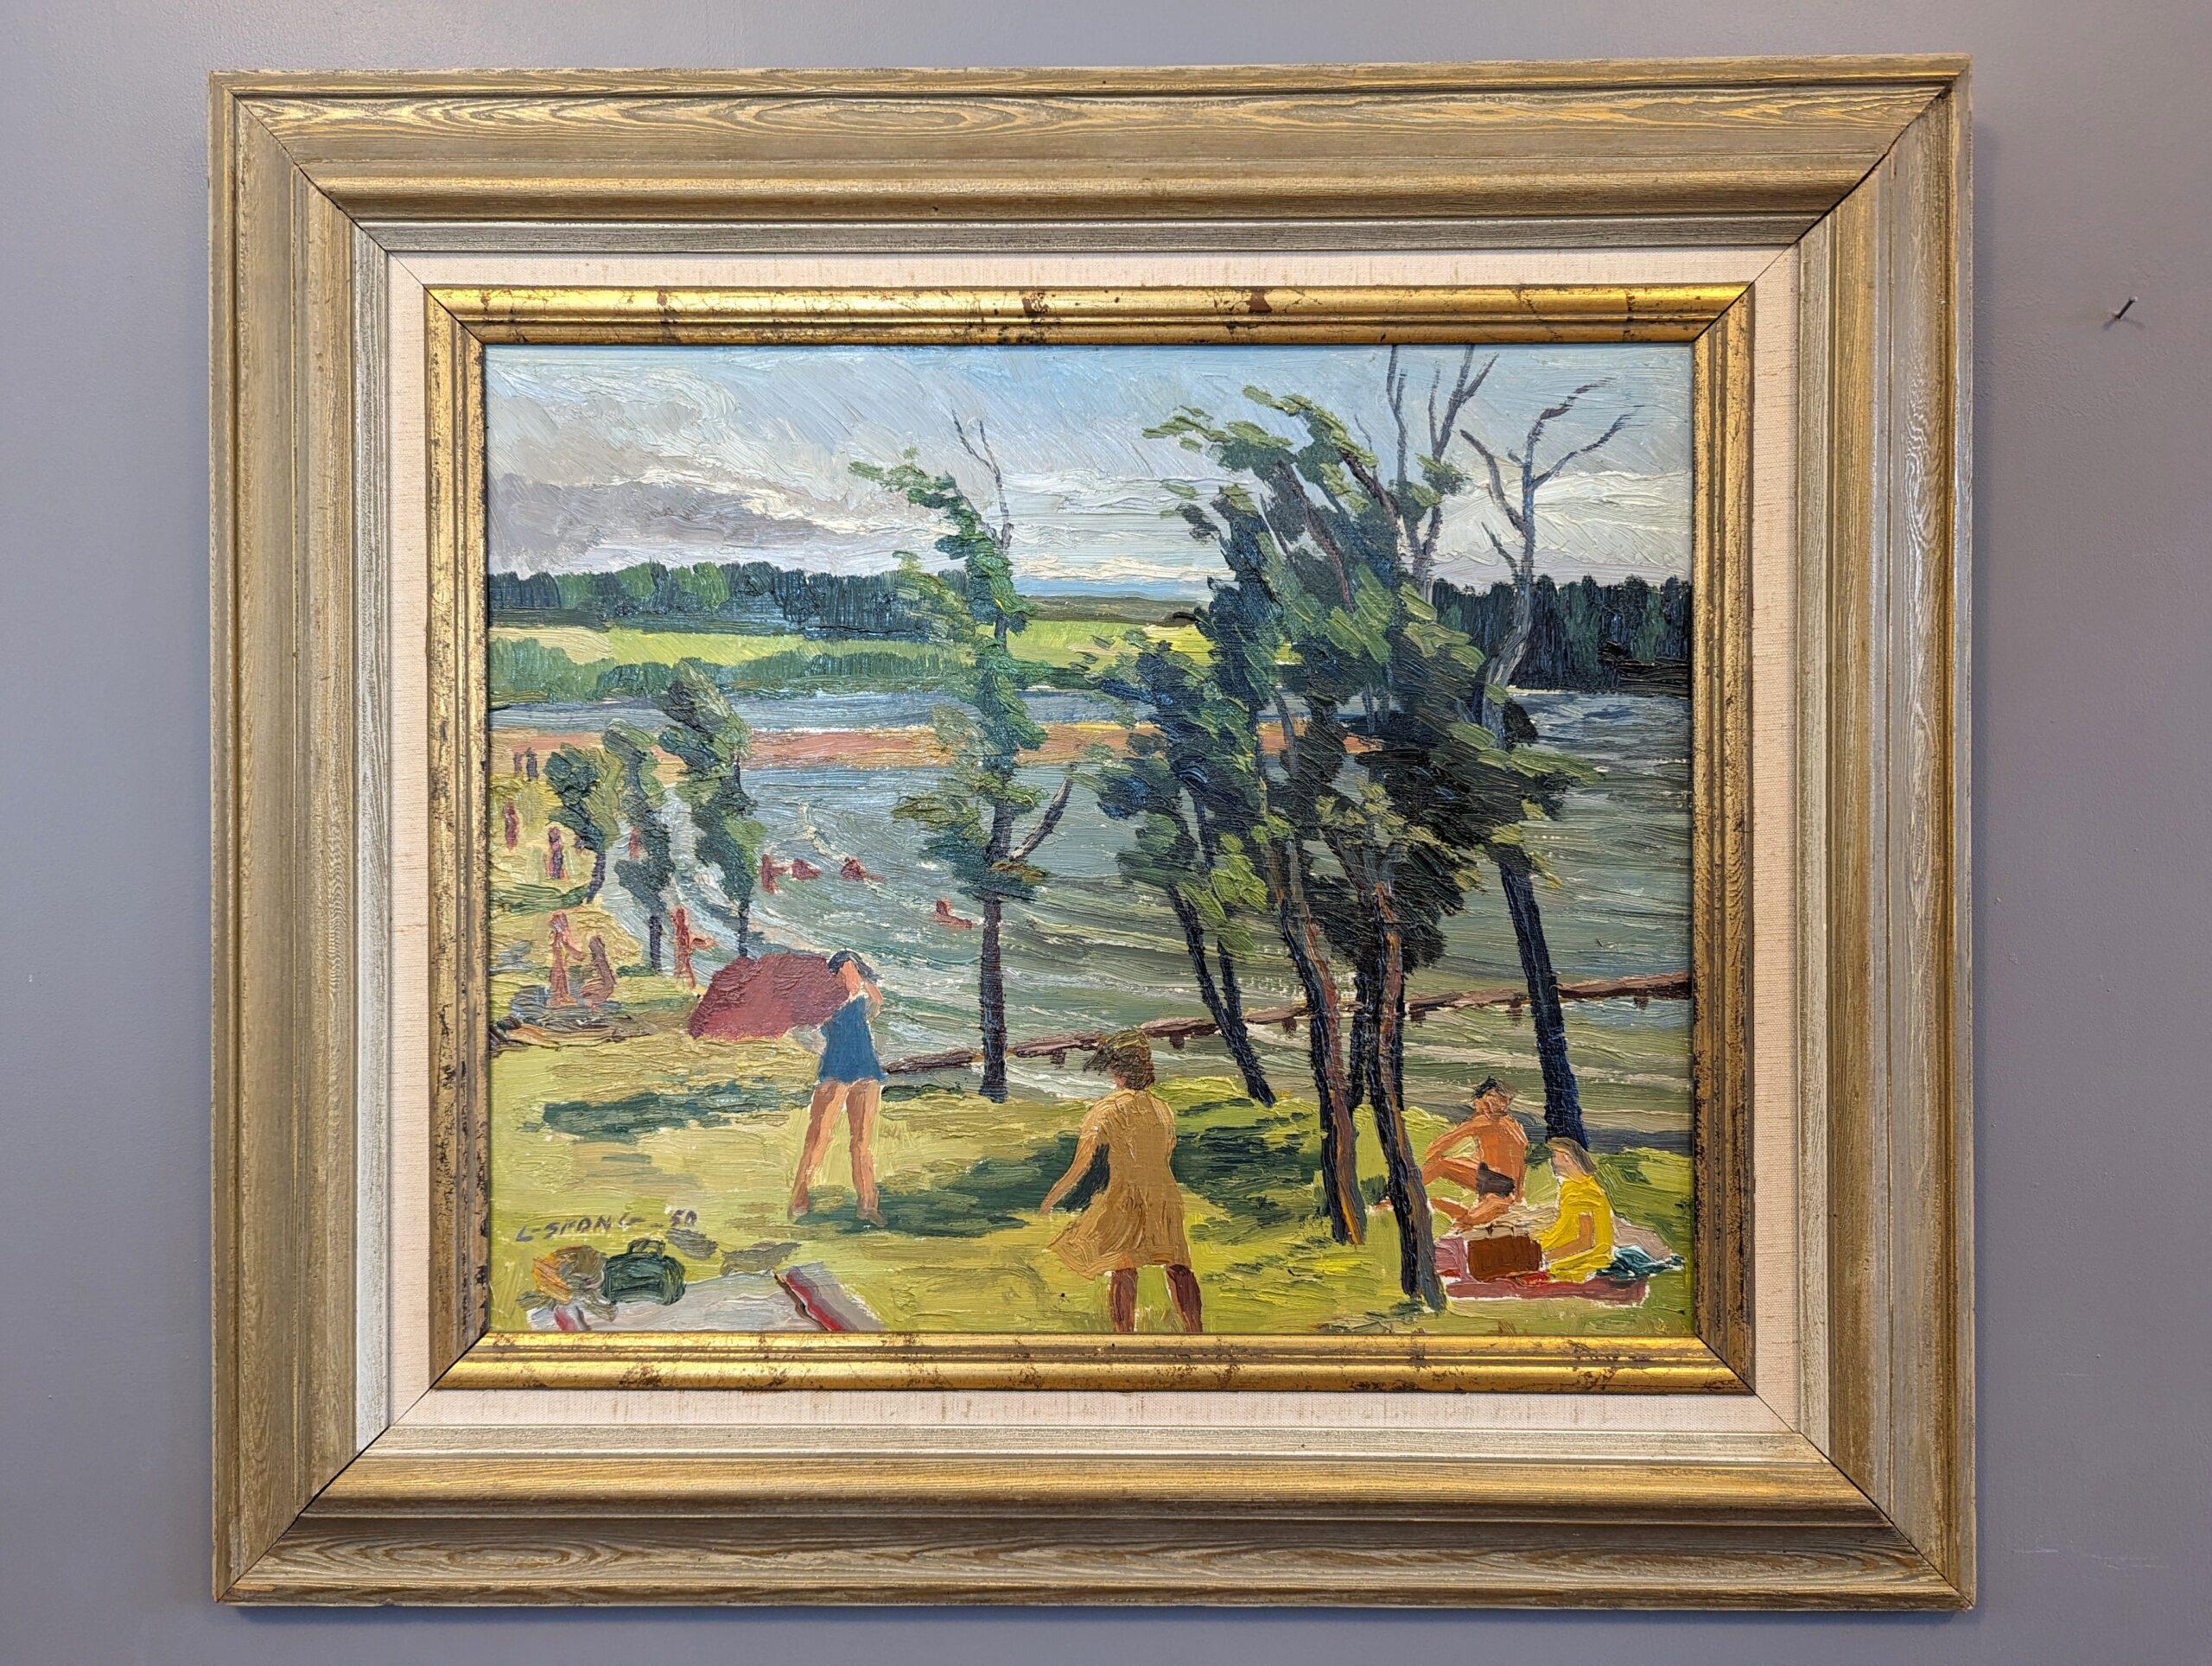 LAKESIDE JOY
Size: 58 x 66 cm (including frame)
Oil on Board

An expressive mid-century landscape composition that captures a carefree atmosphere of a perfect day spent by the lakeside, executed in oil and dated 1950.

The painting depicts a serene